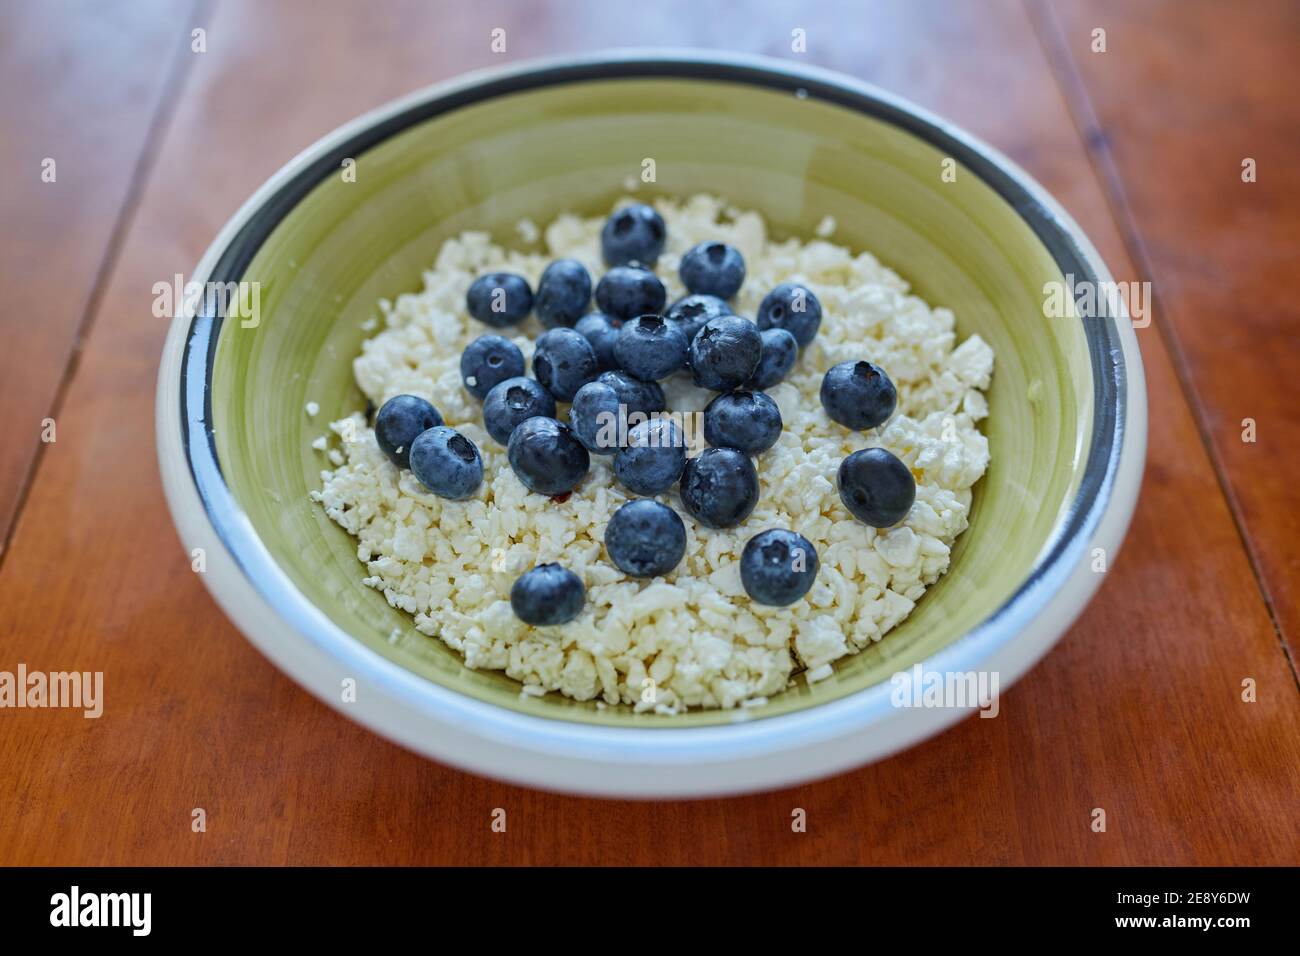 A bowl of cottage cheese with blueberries Stock Photo